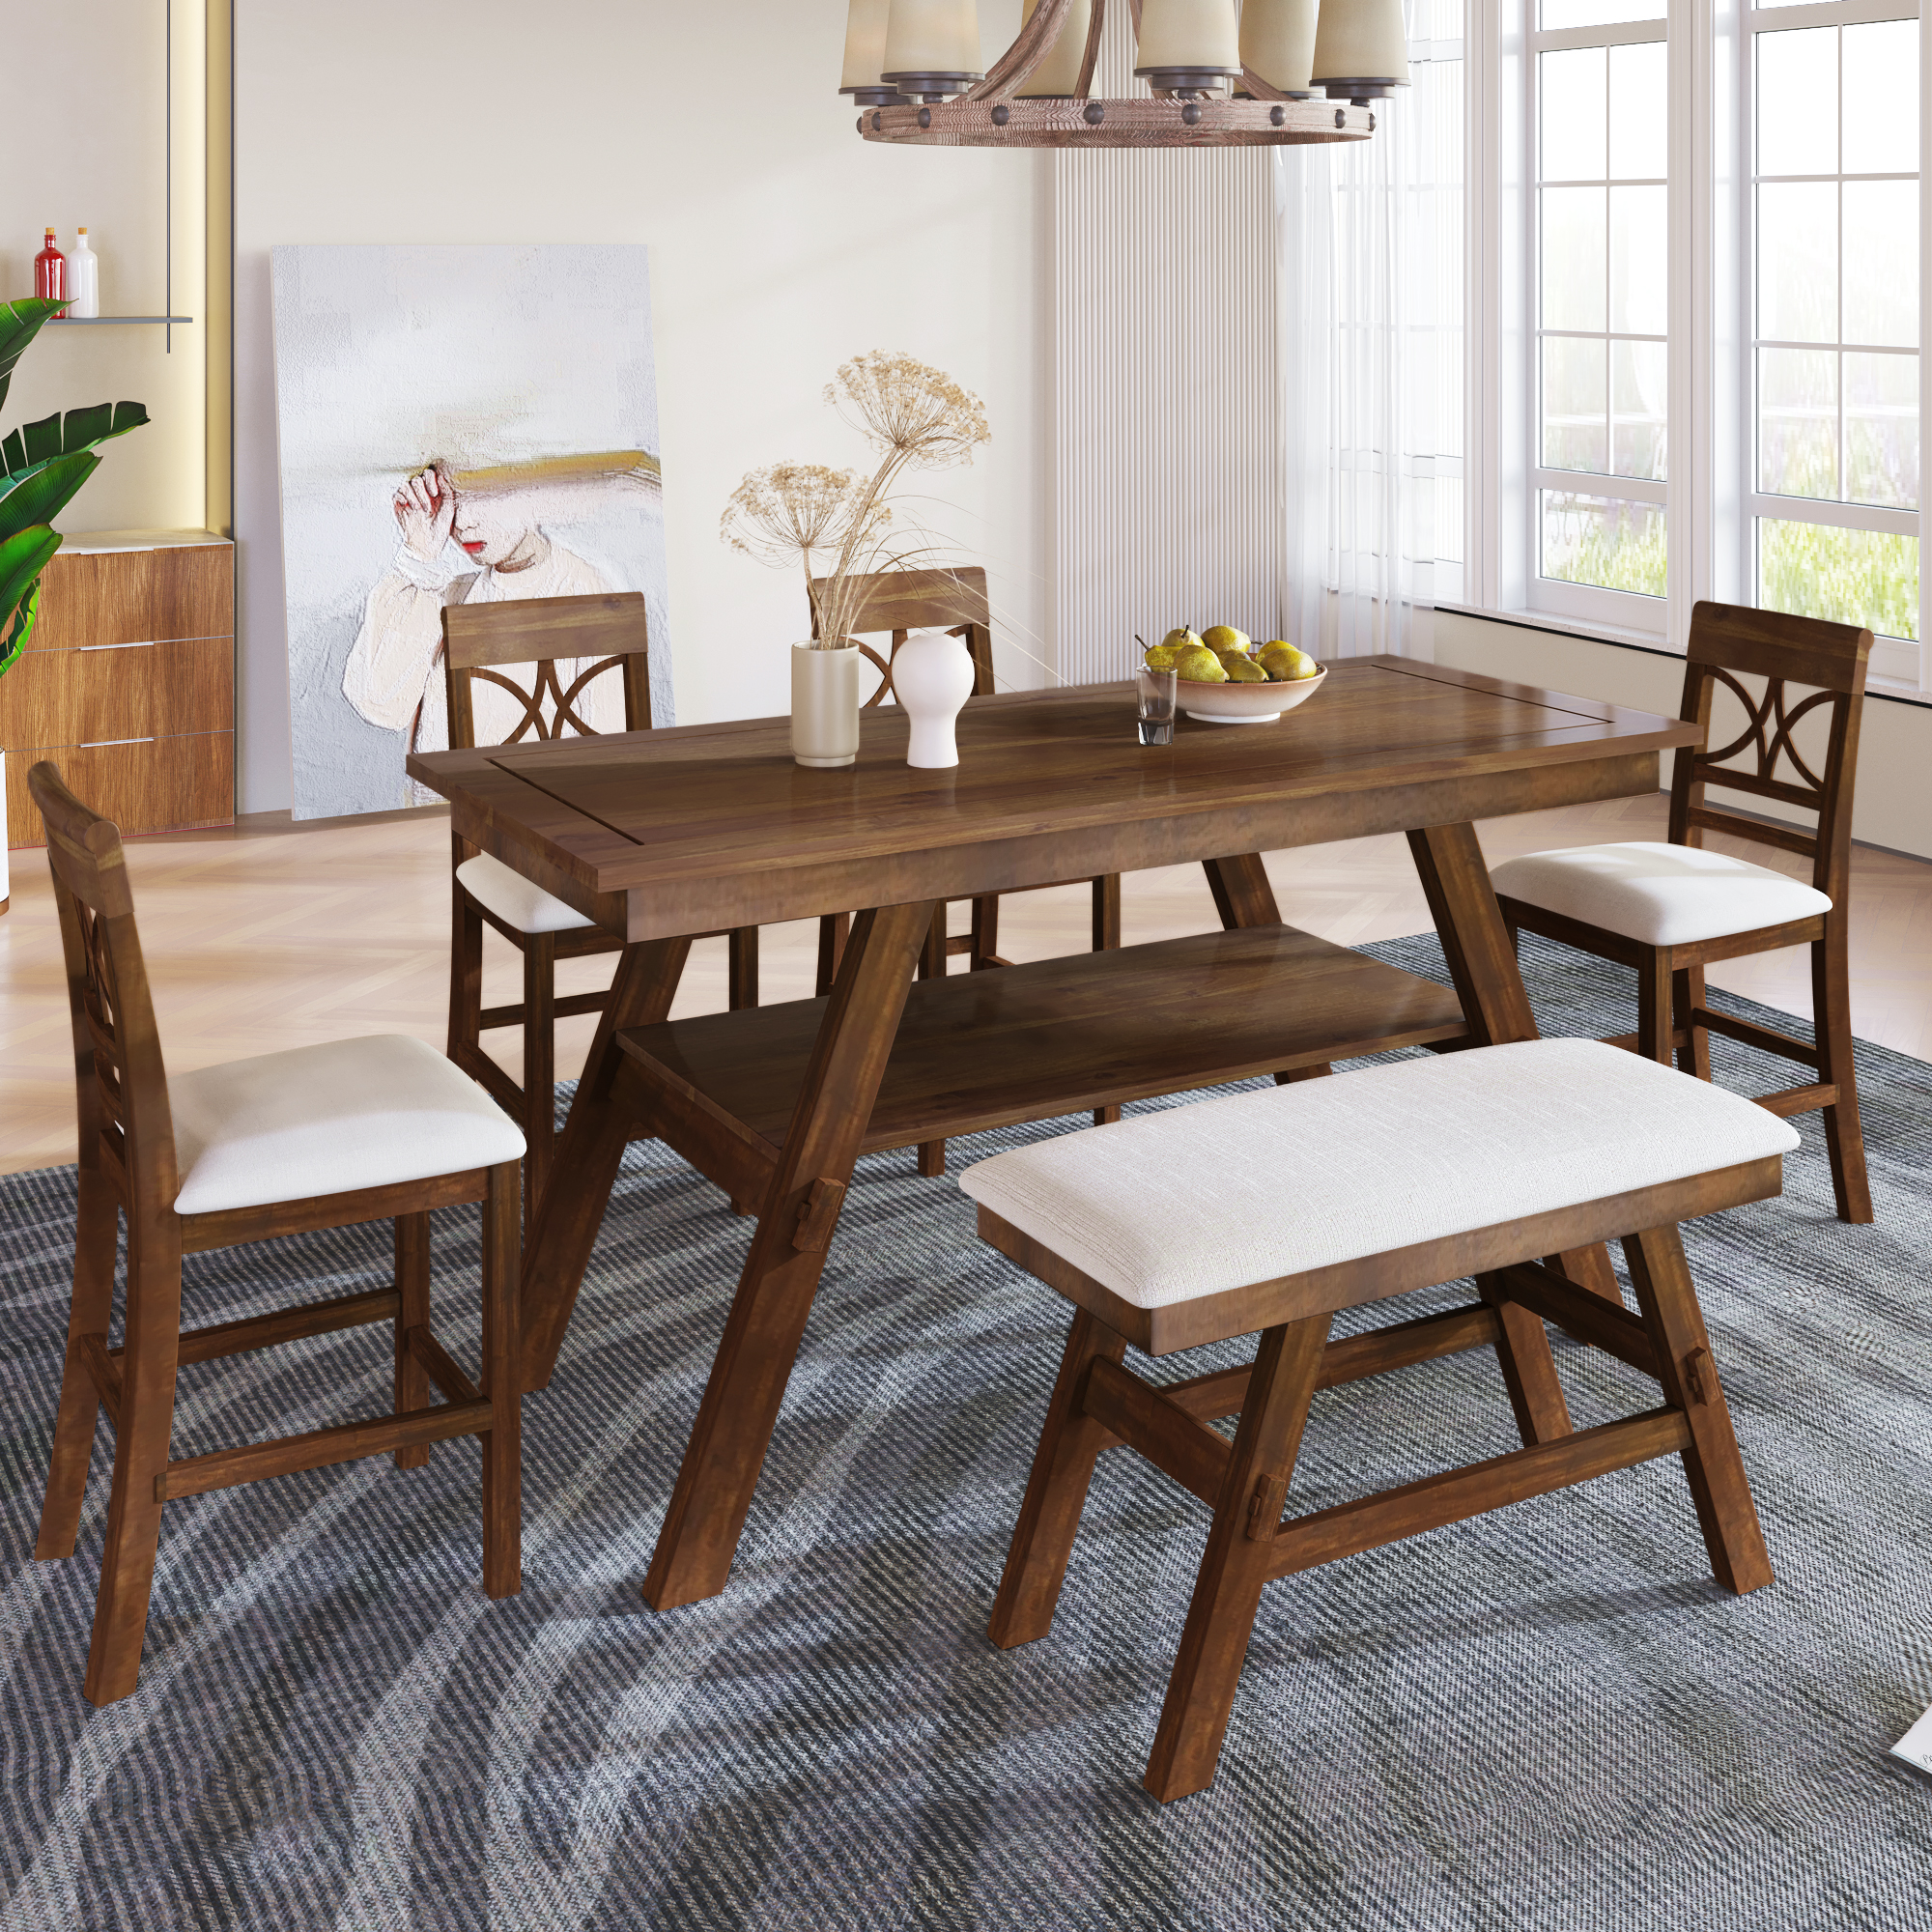 6-Piece Wood Counter Height Dining Table Set - SH000257AAD